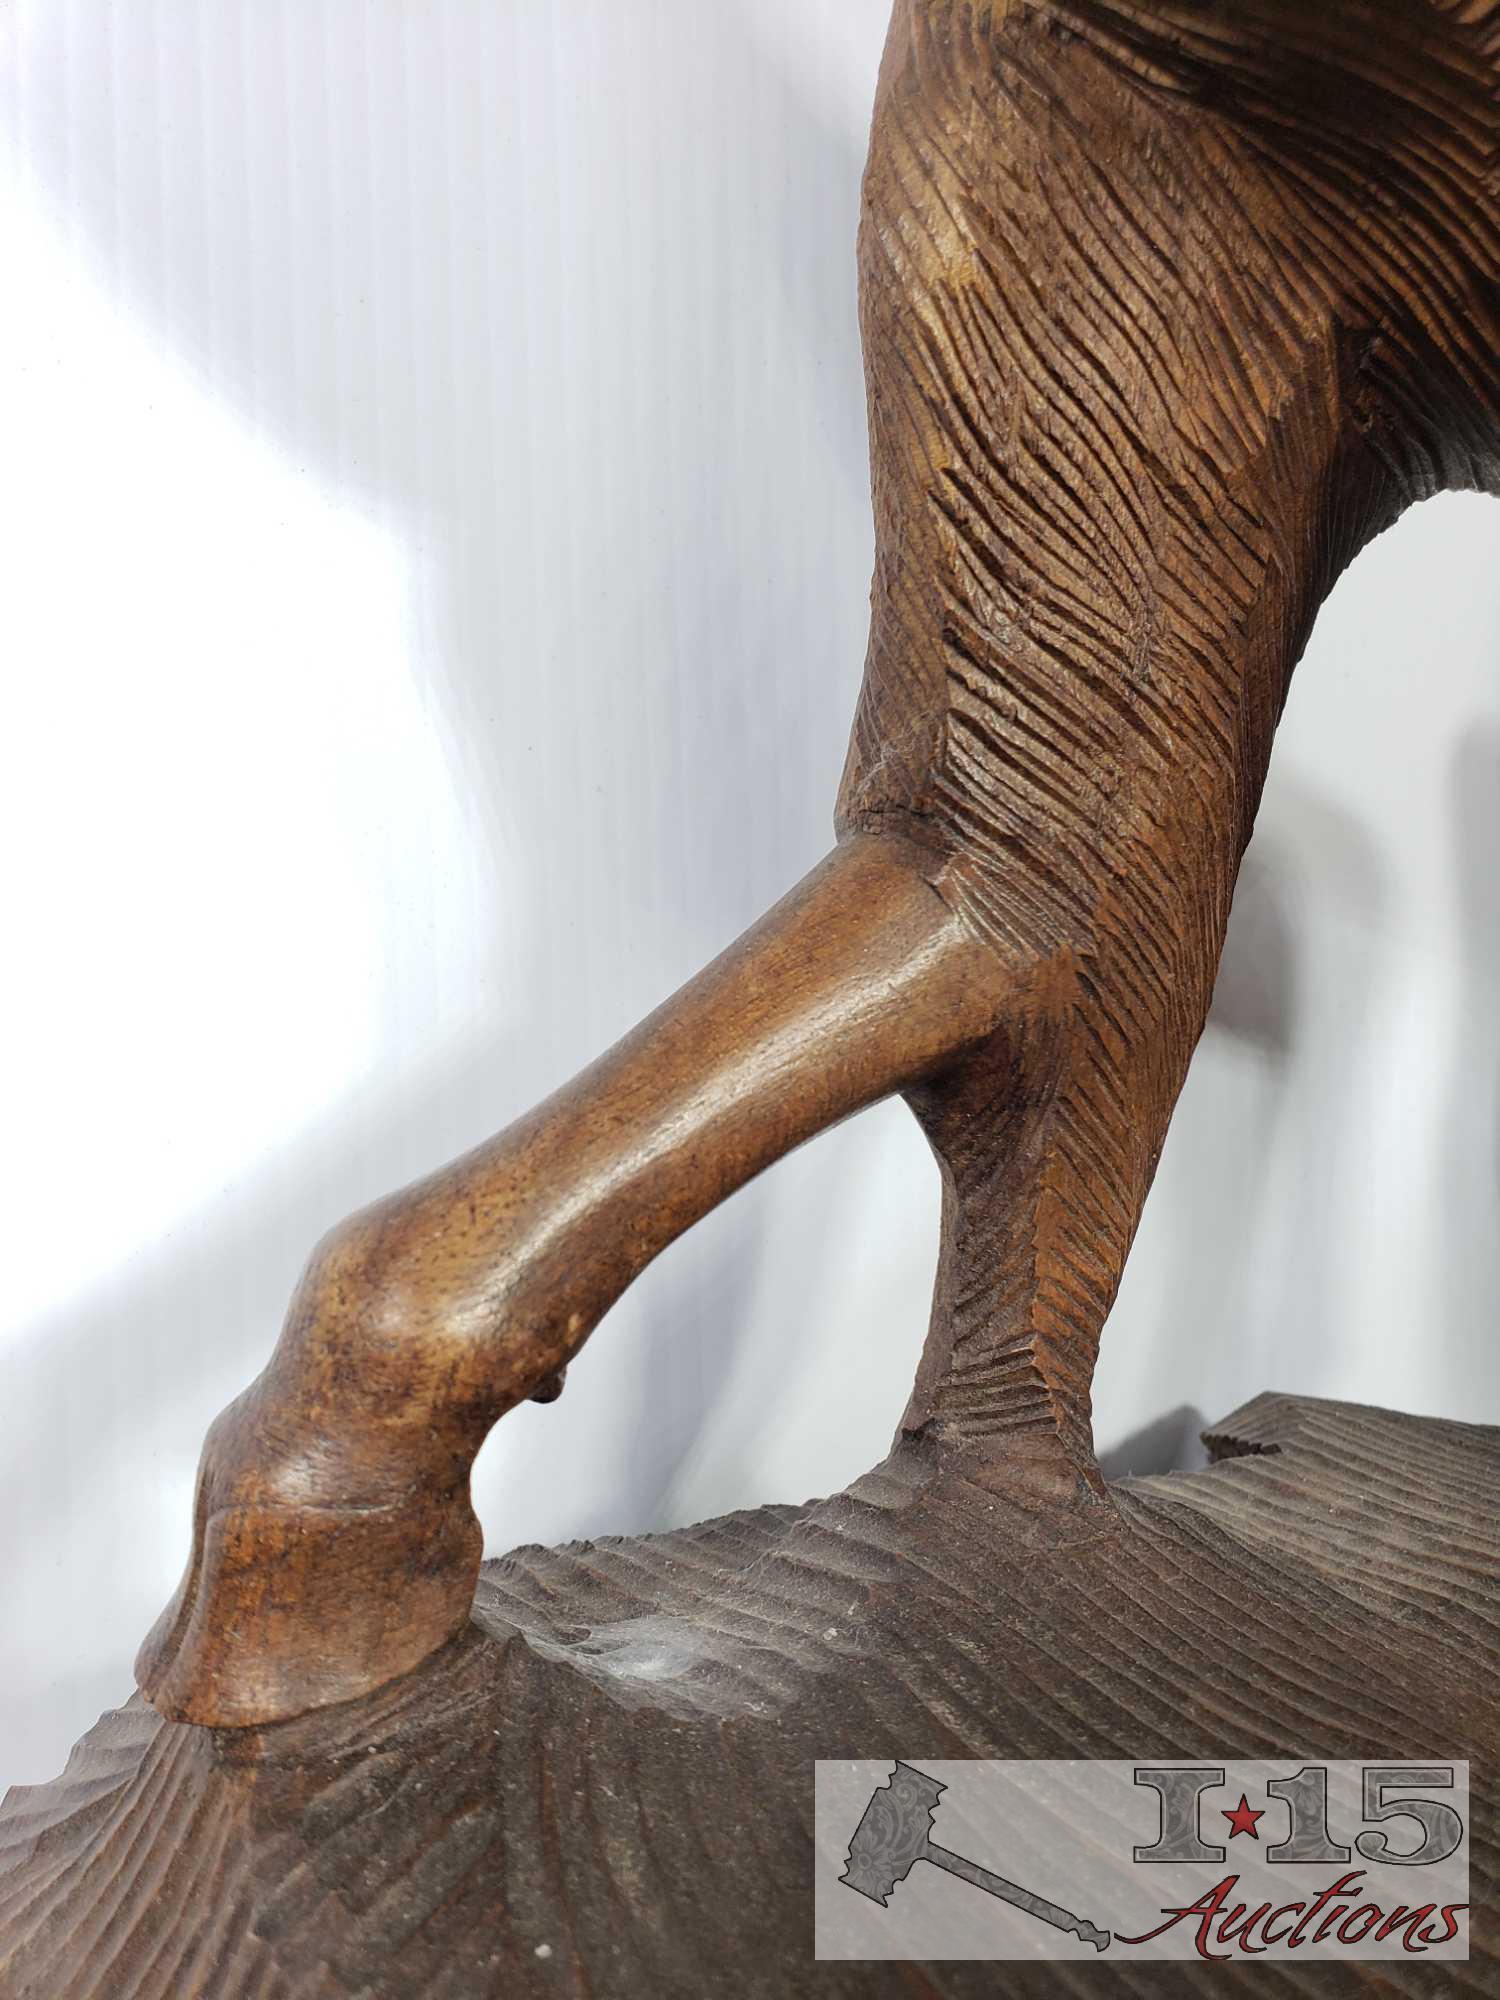 Hand Carved Javanese Ebony Wooden Goats Very detailed and modeled after the goats of the Island of